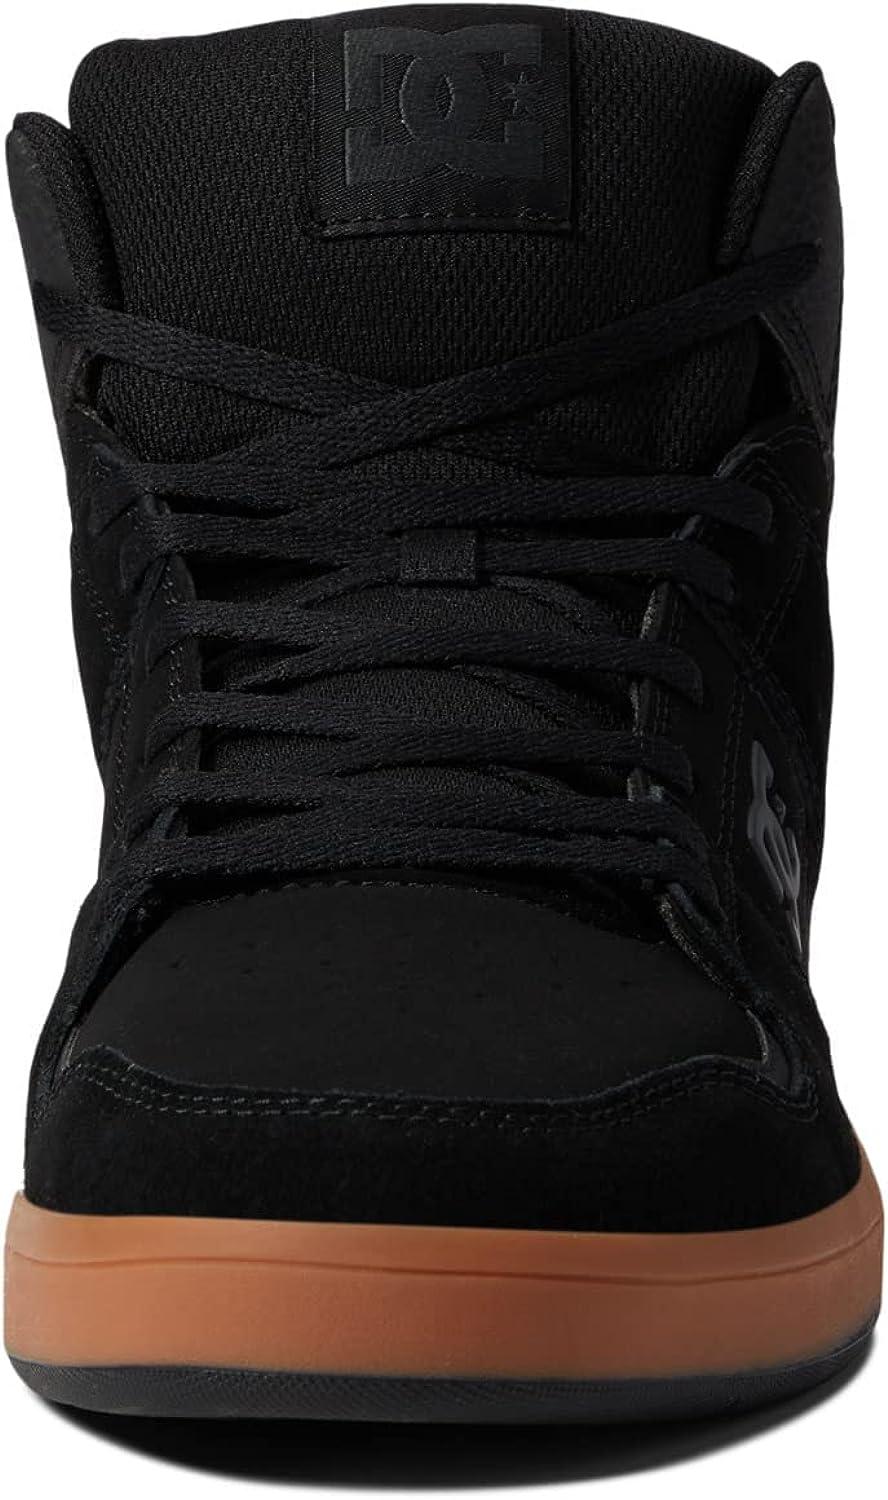 DC Men's Cure Casual High-Top Skate Shoes